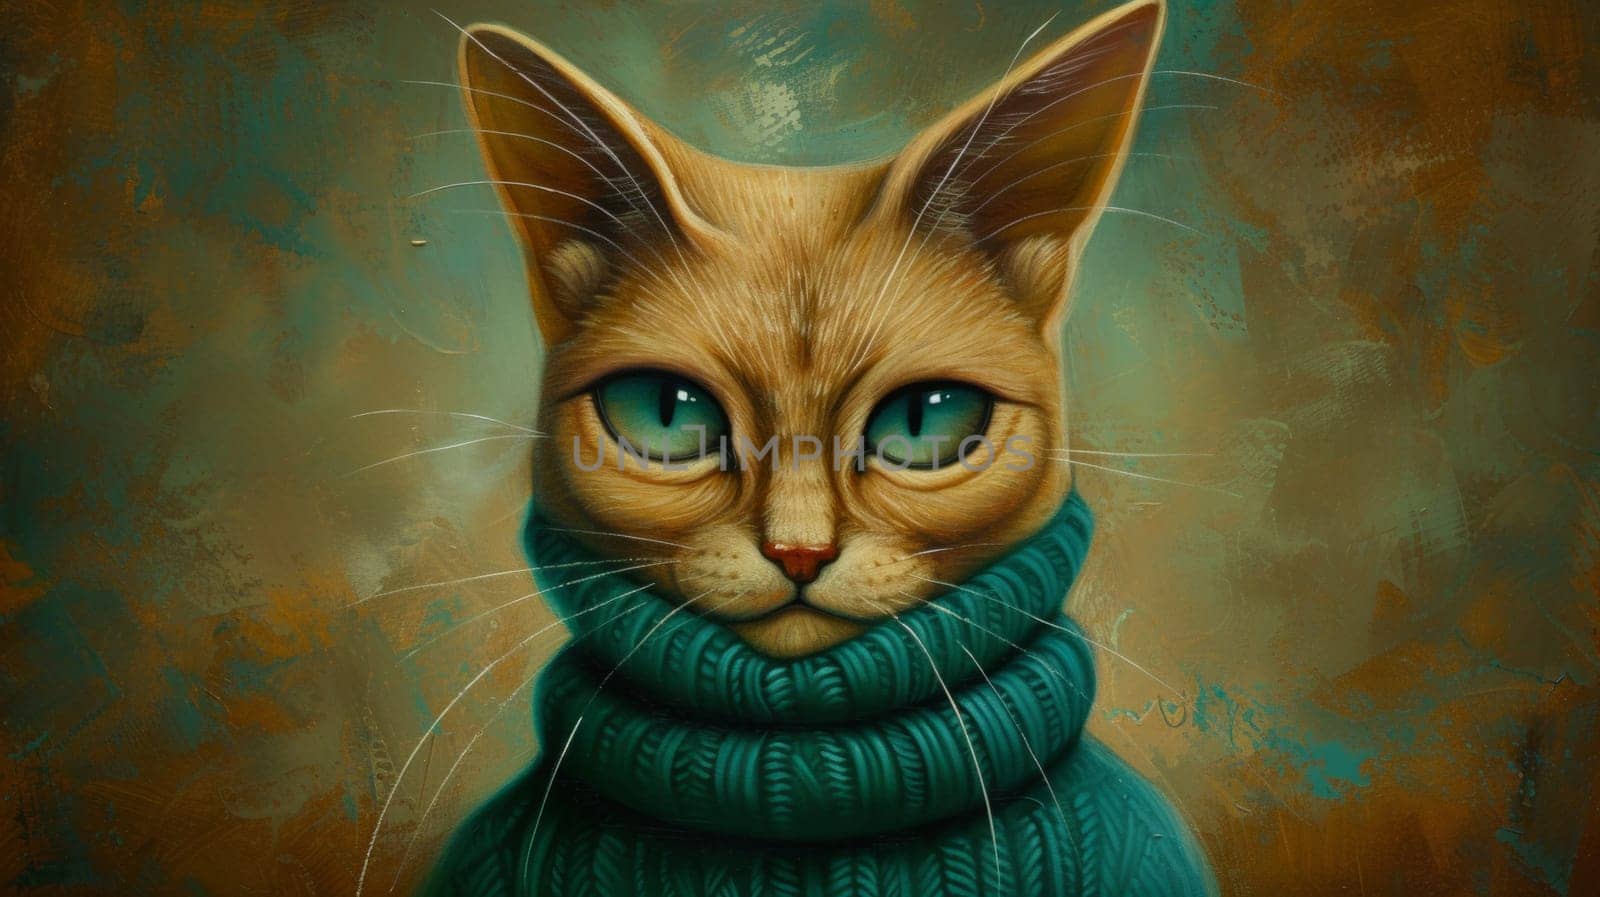 A painting of a cat wearing an ugly sweater with green eyes